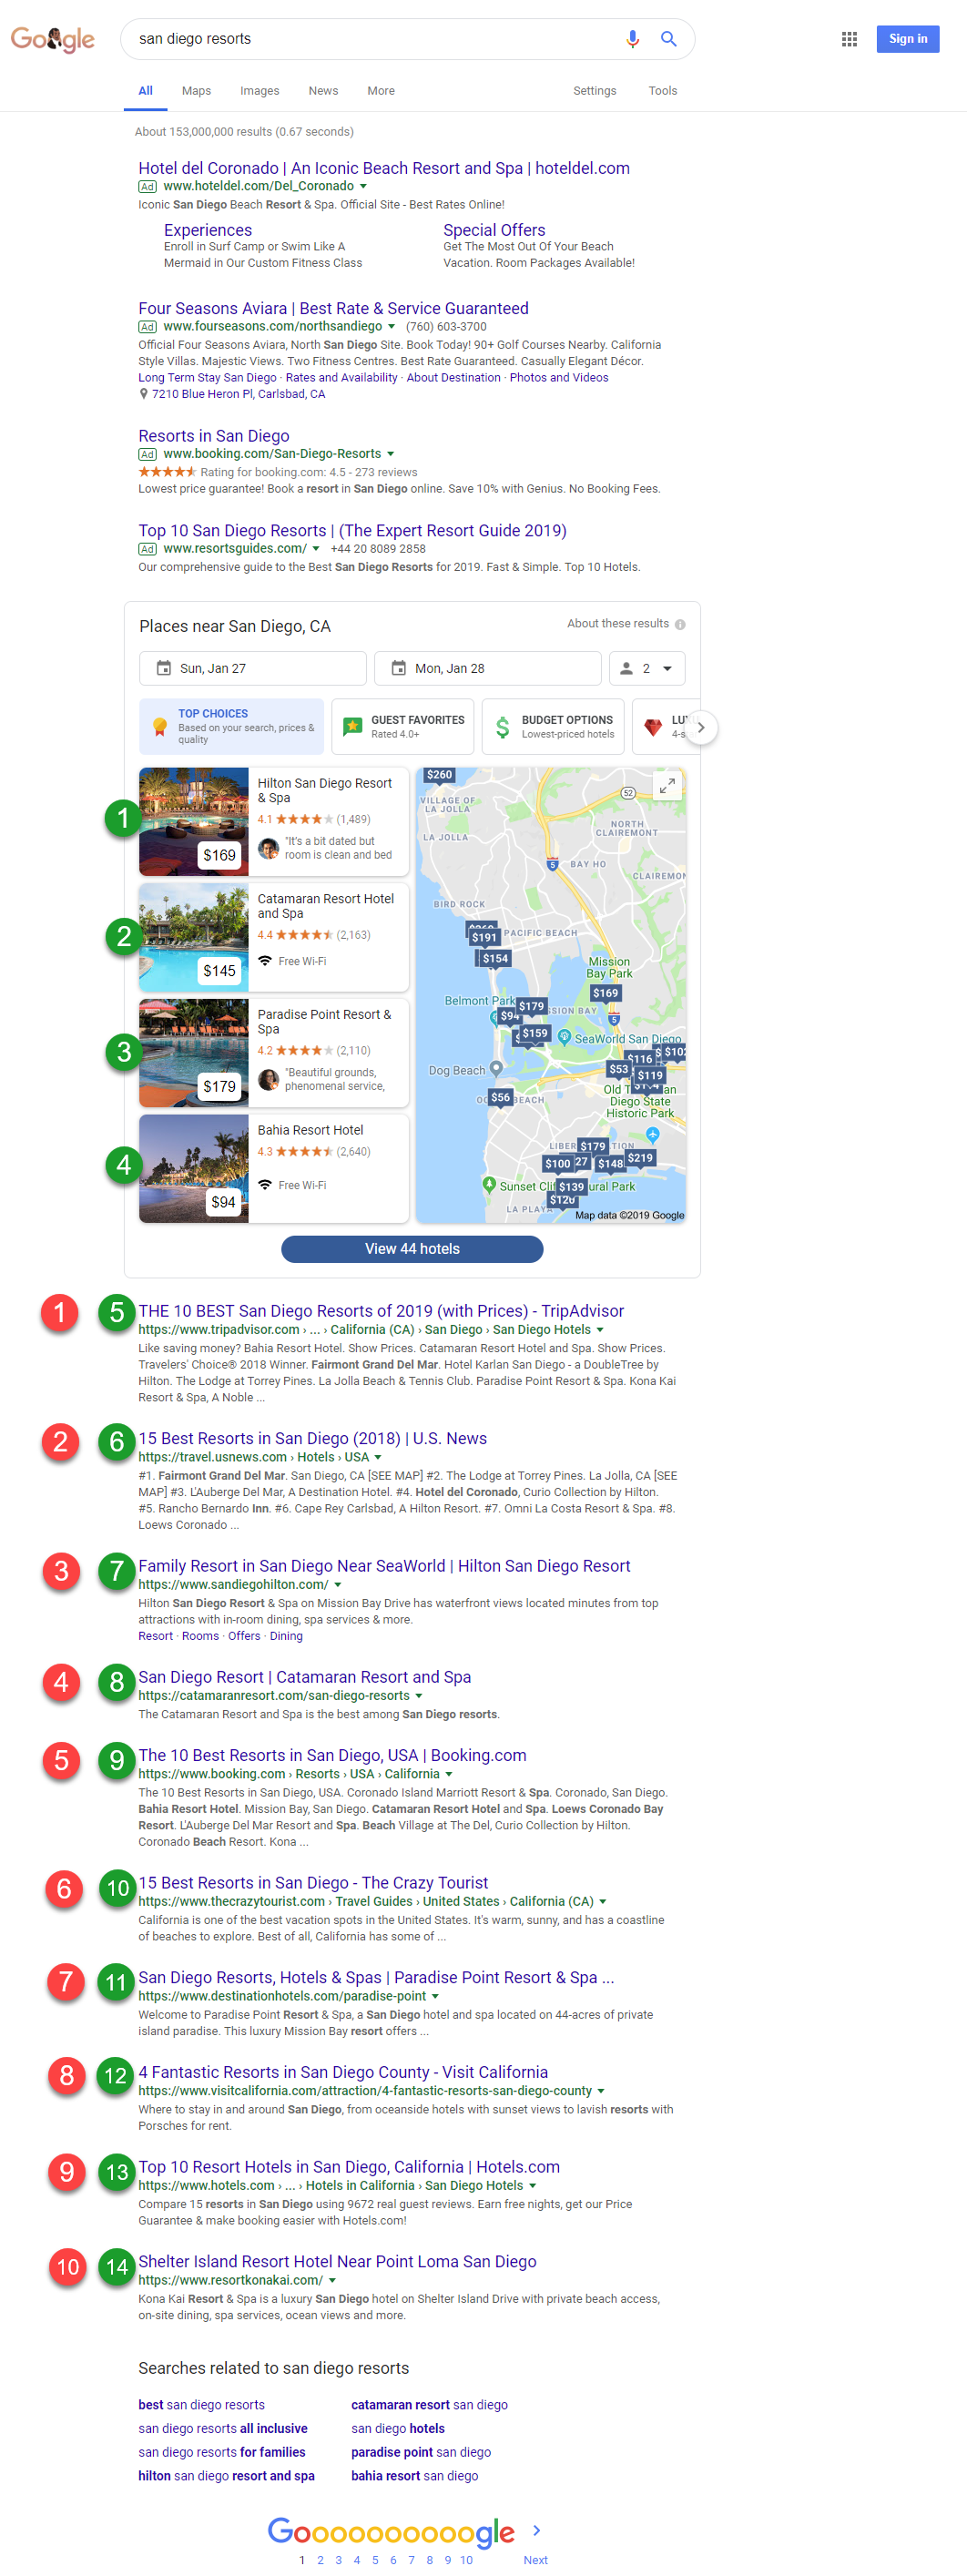 Google Hotel Pack Results included